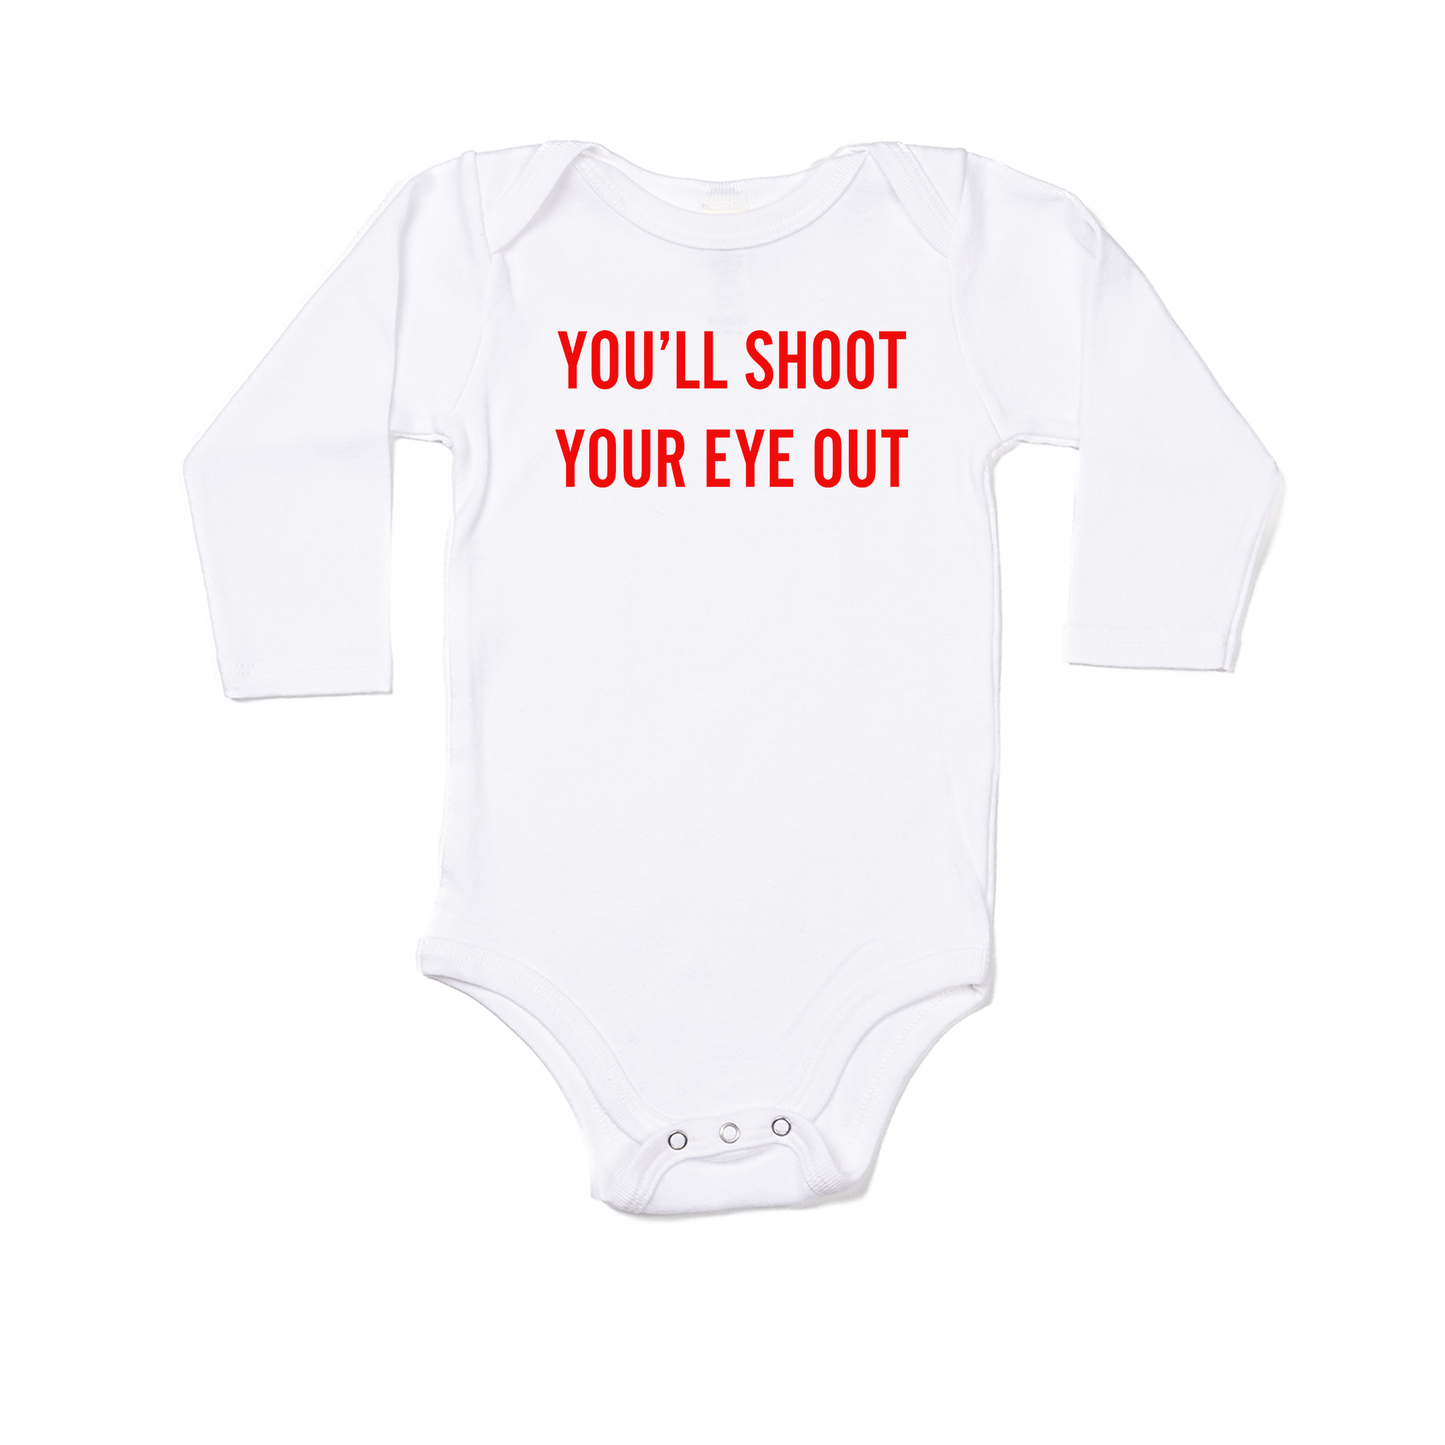 You'll Shoot Your Eye Out (Red) - Bodysuit (White, Long Sleeve)